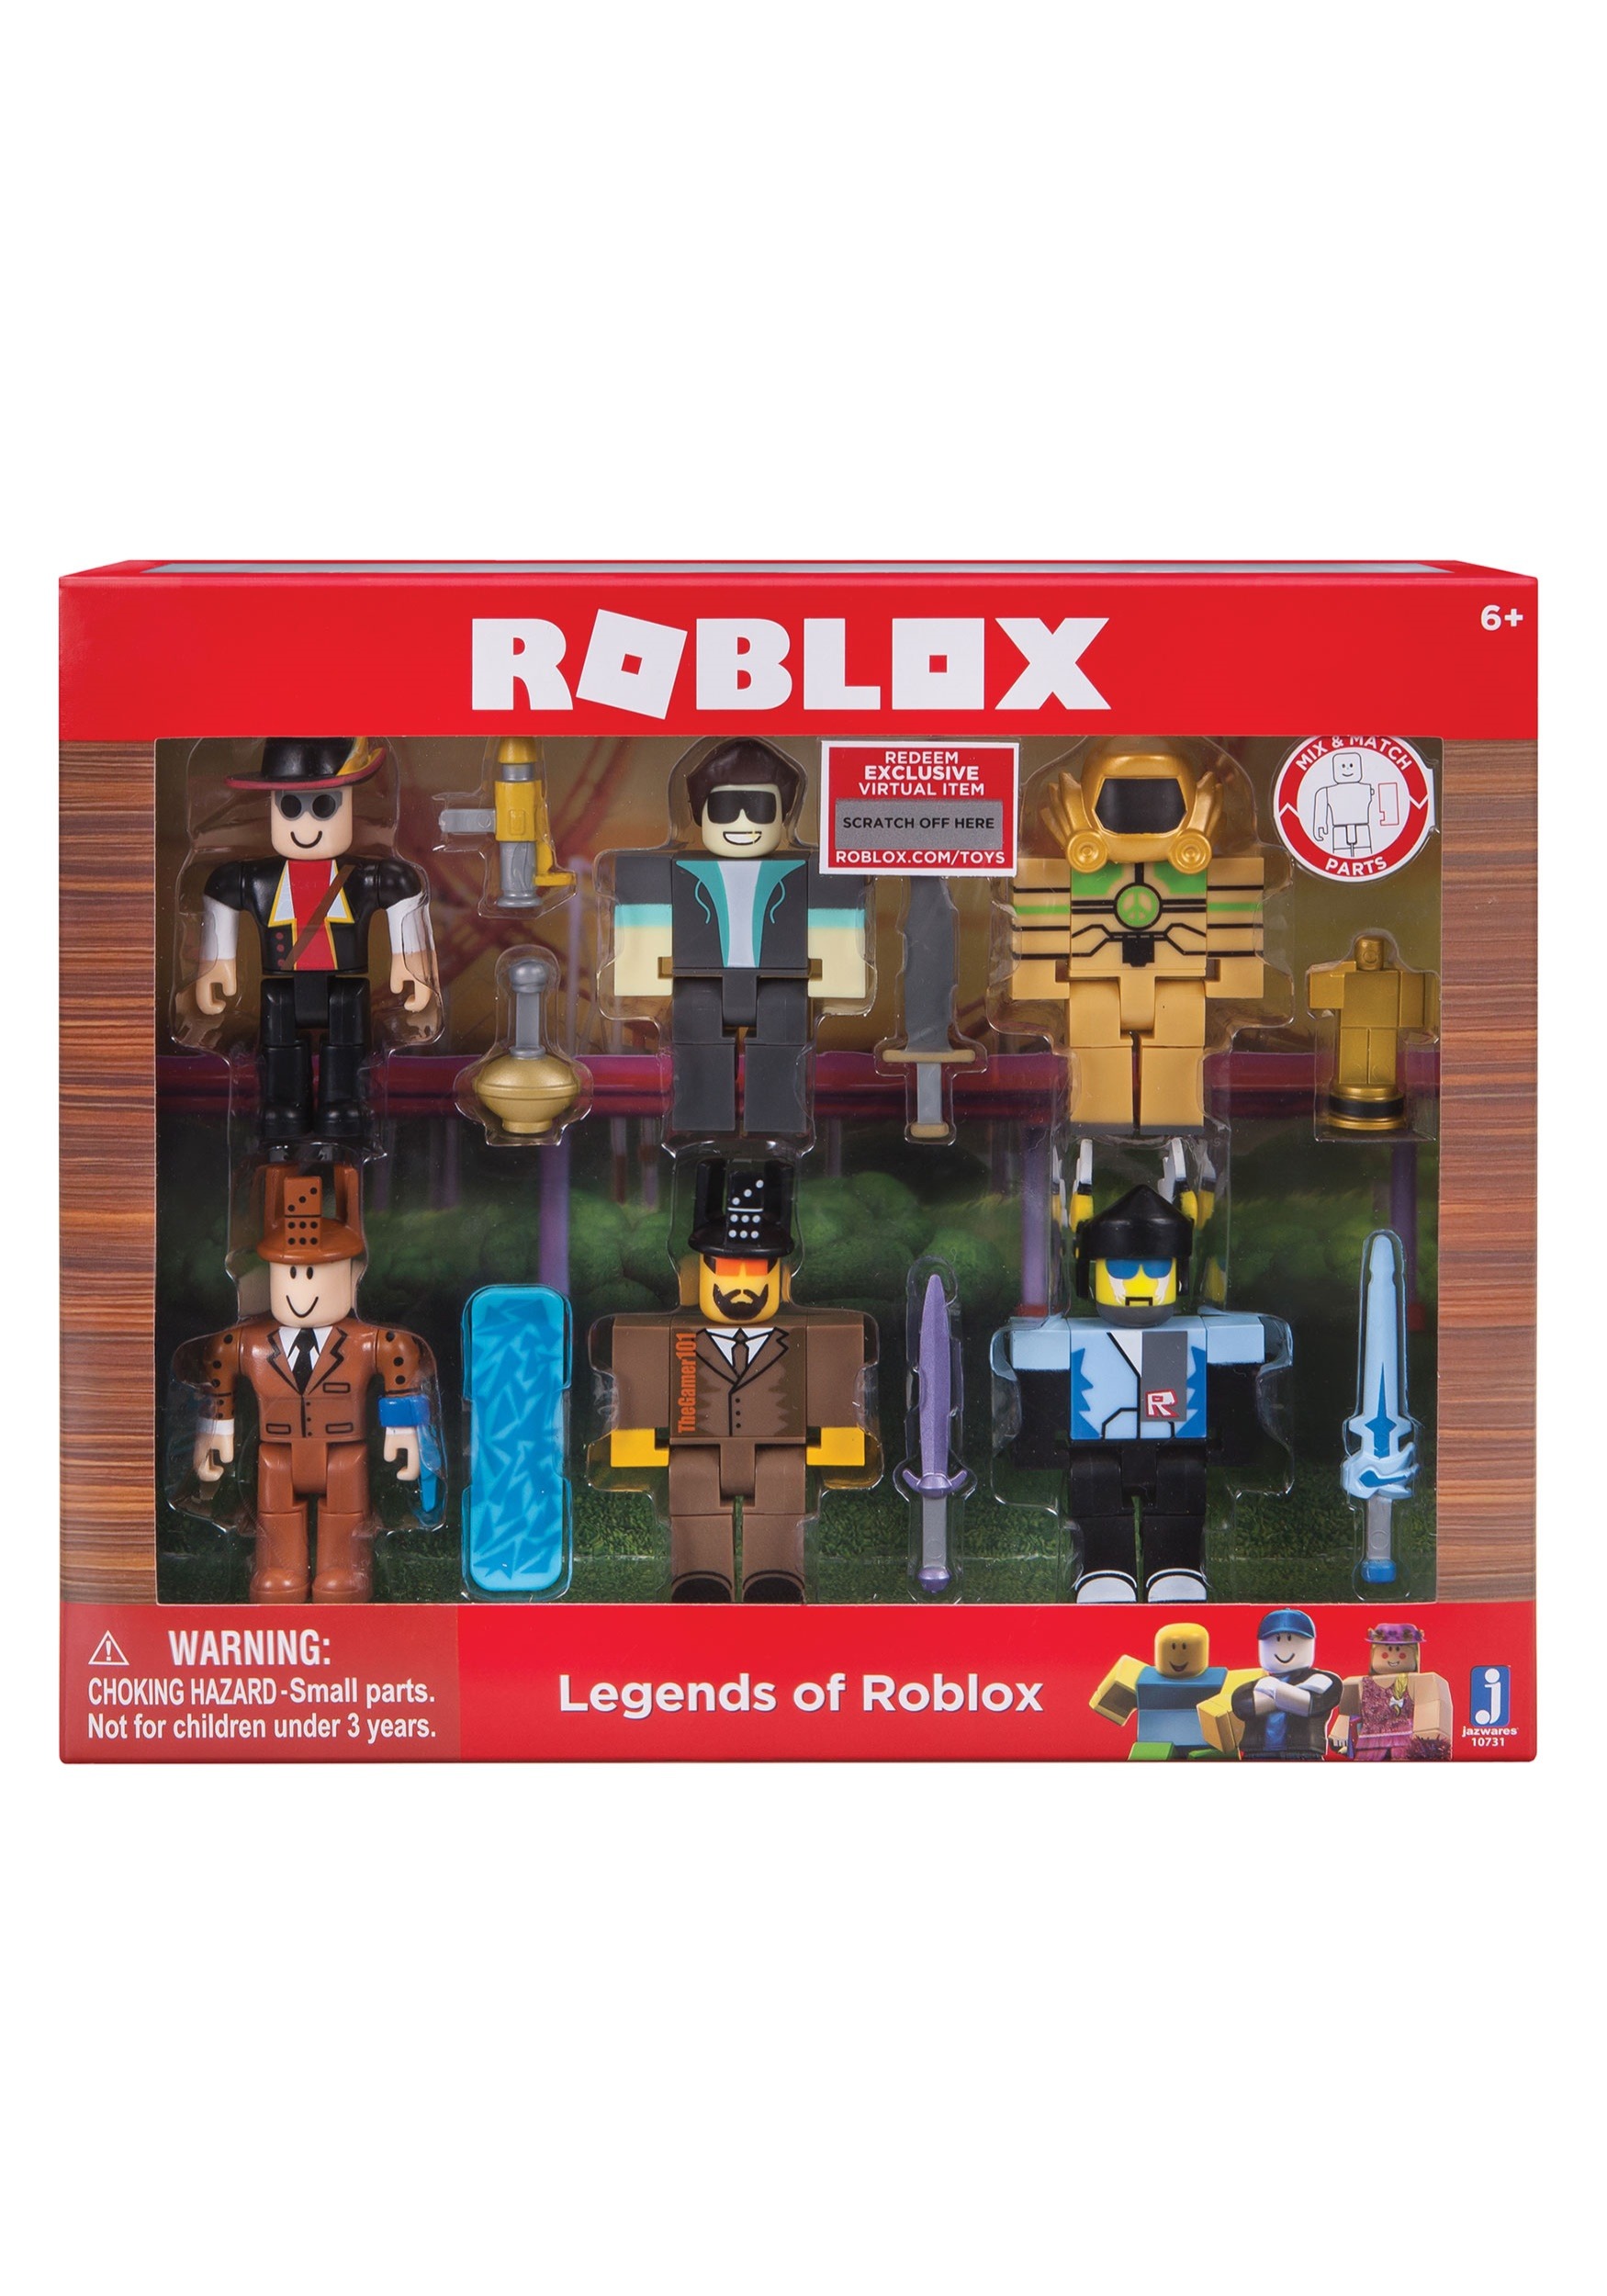 Roblox Legends Of Roblox Six Figure Pack Jazwares Domestic 10731 Action Figures Statues Action Figures Statues Action Figures Action Figures Statues - roblox legends six figure pack